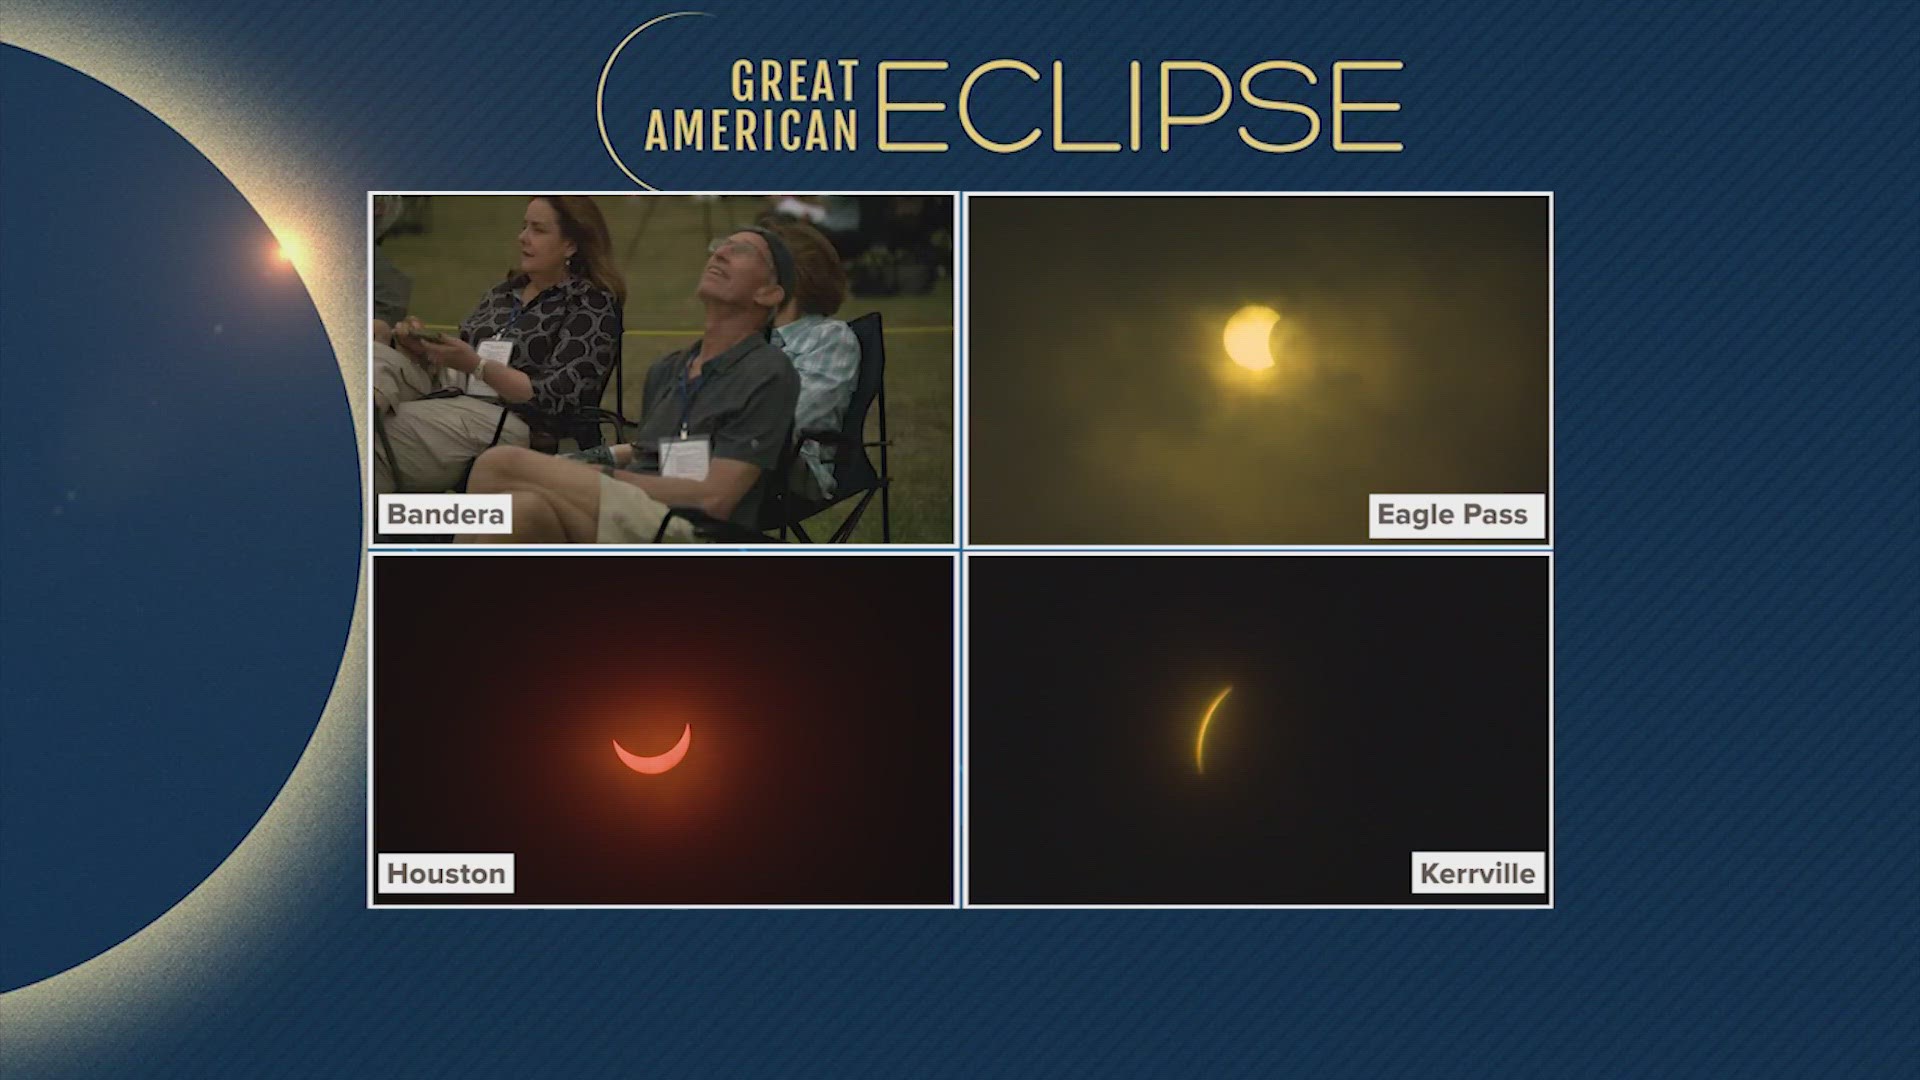 Eagle Pass got one of the first views of the eclipse in Texas. Totality lasted for four minutes and 24 seconds. It had one of the longest durations in the country.